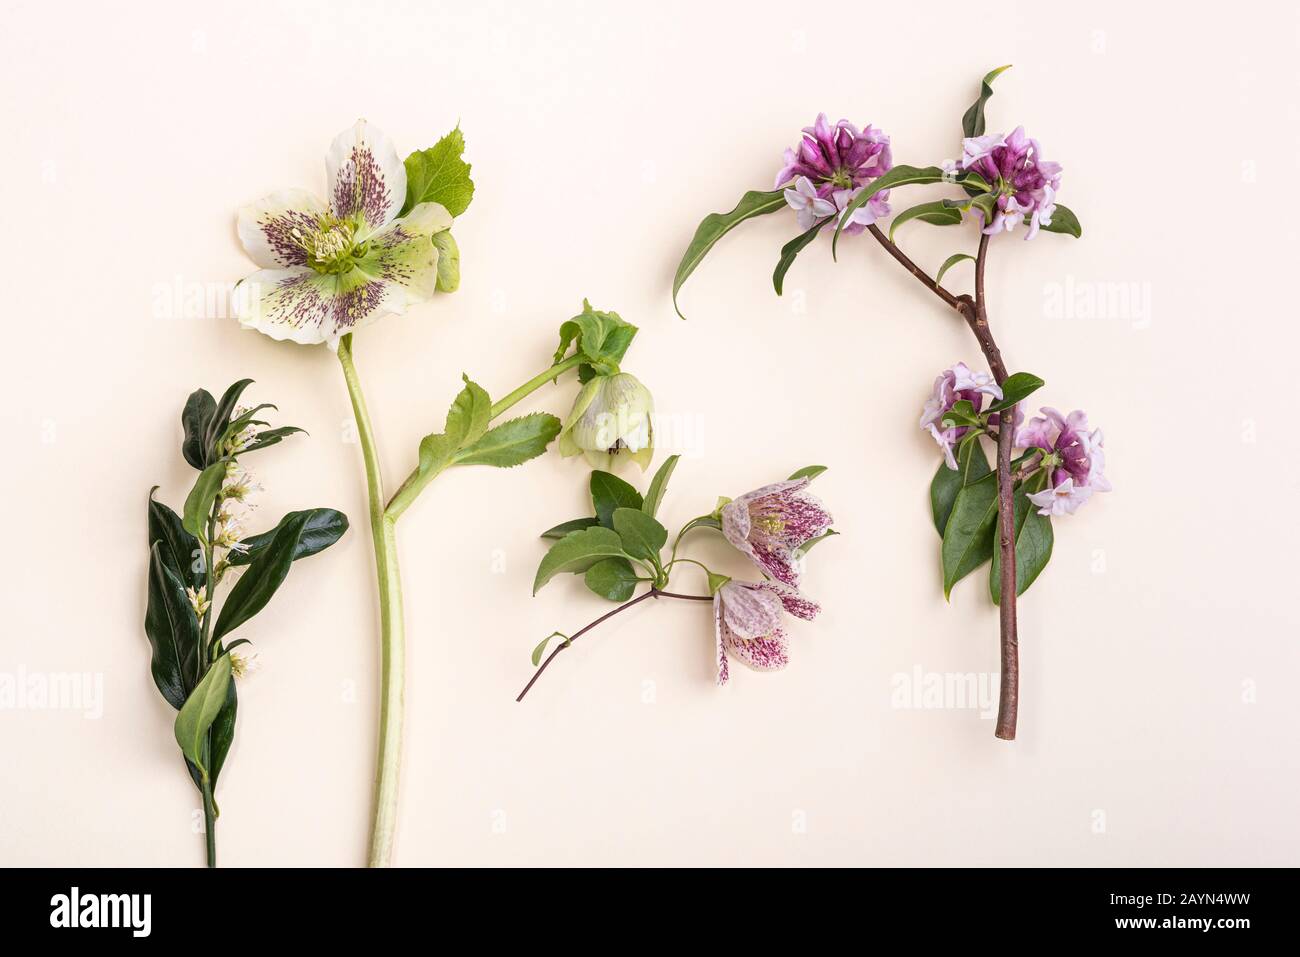 Group of winter flowering plants Stock Photo